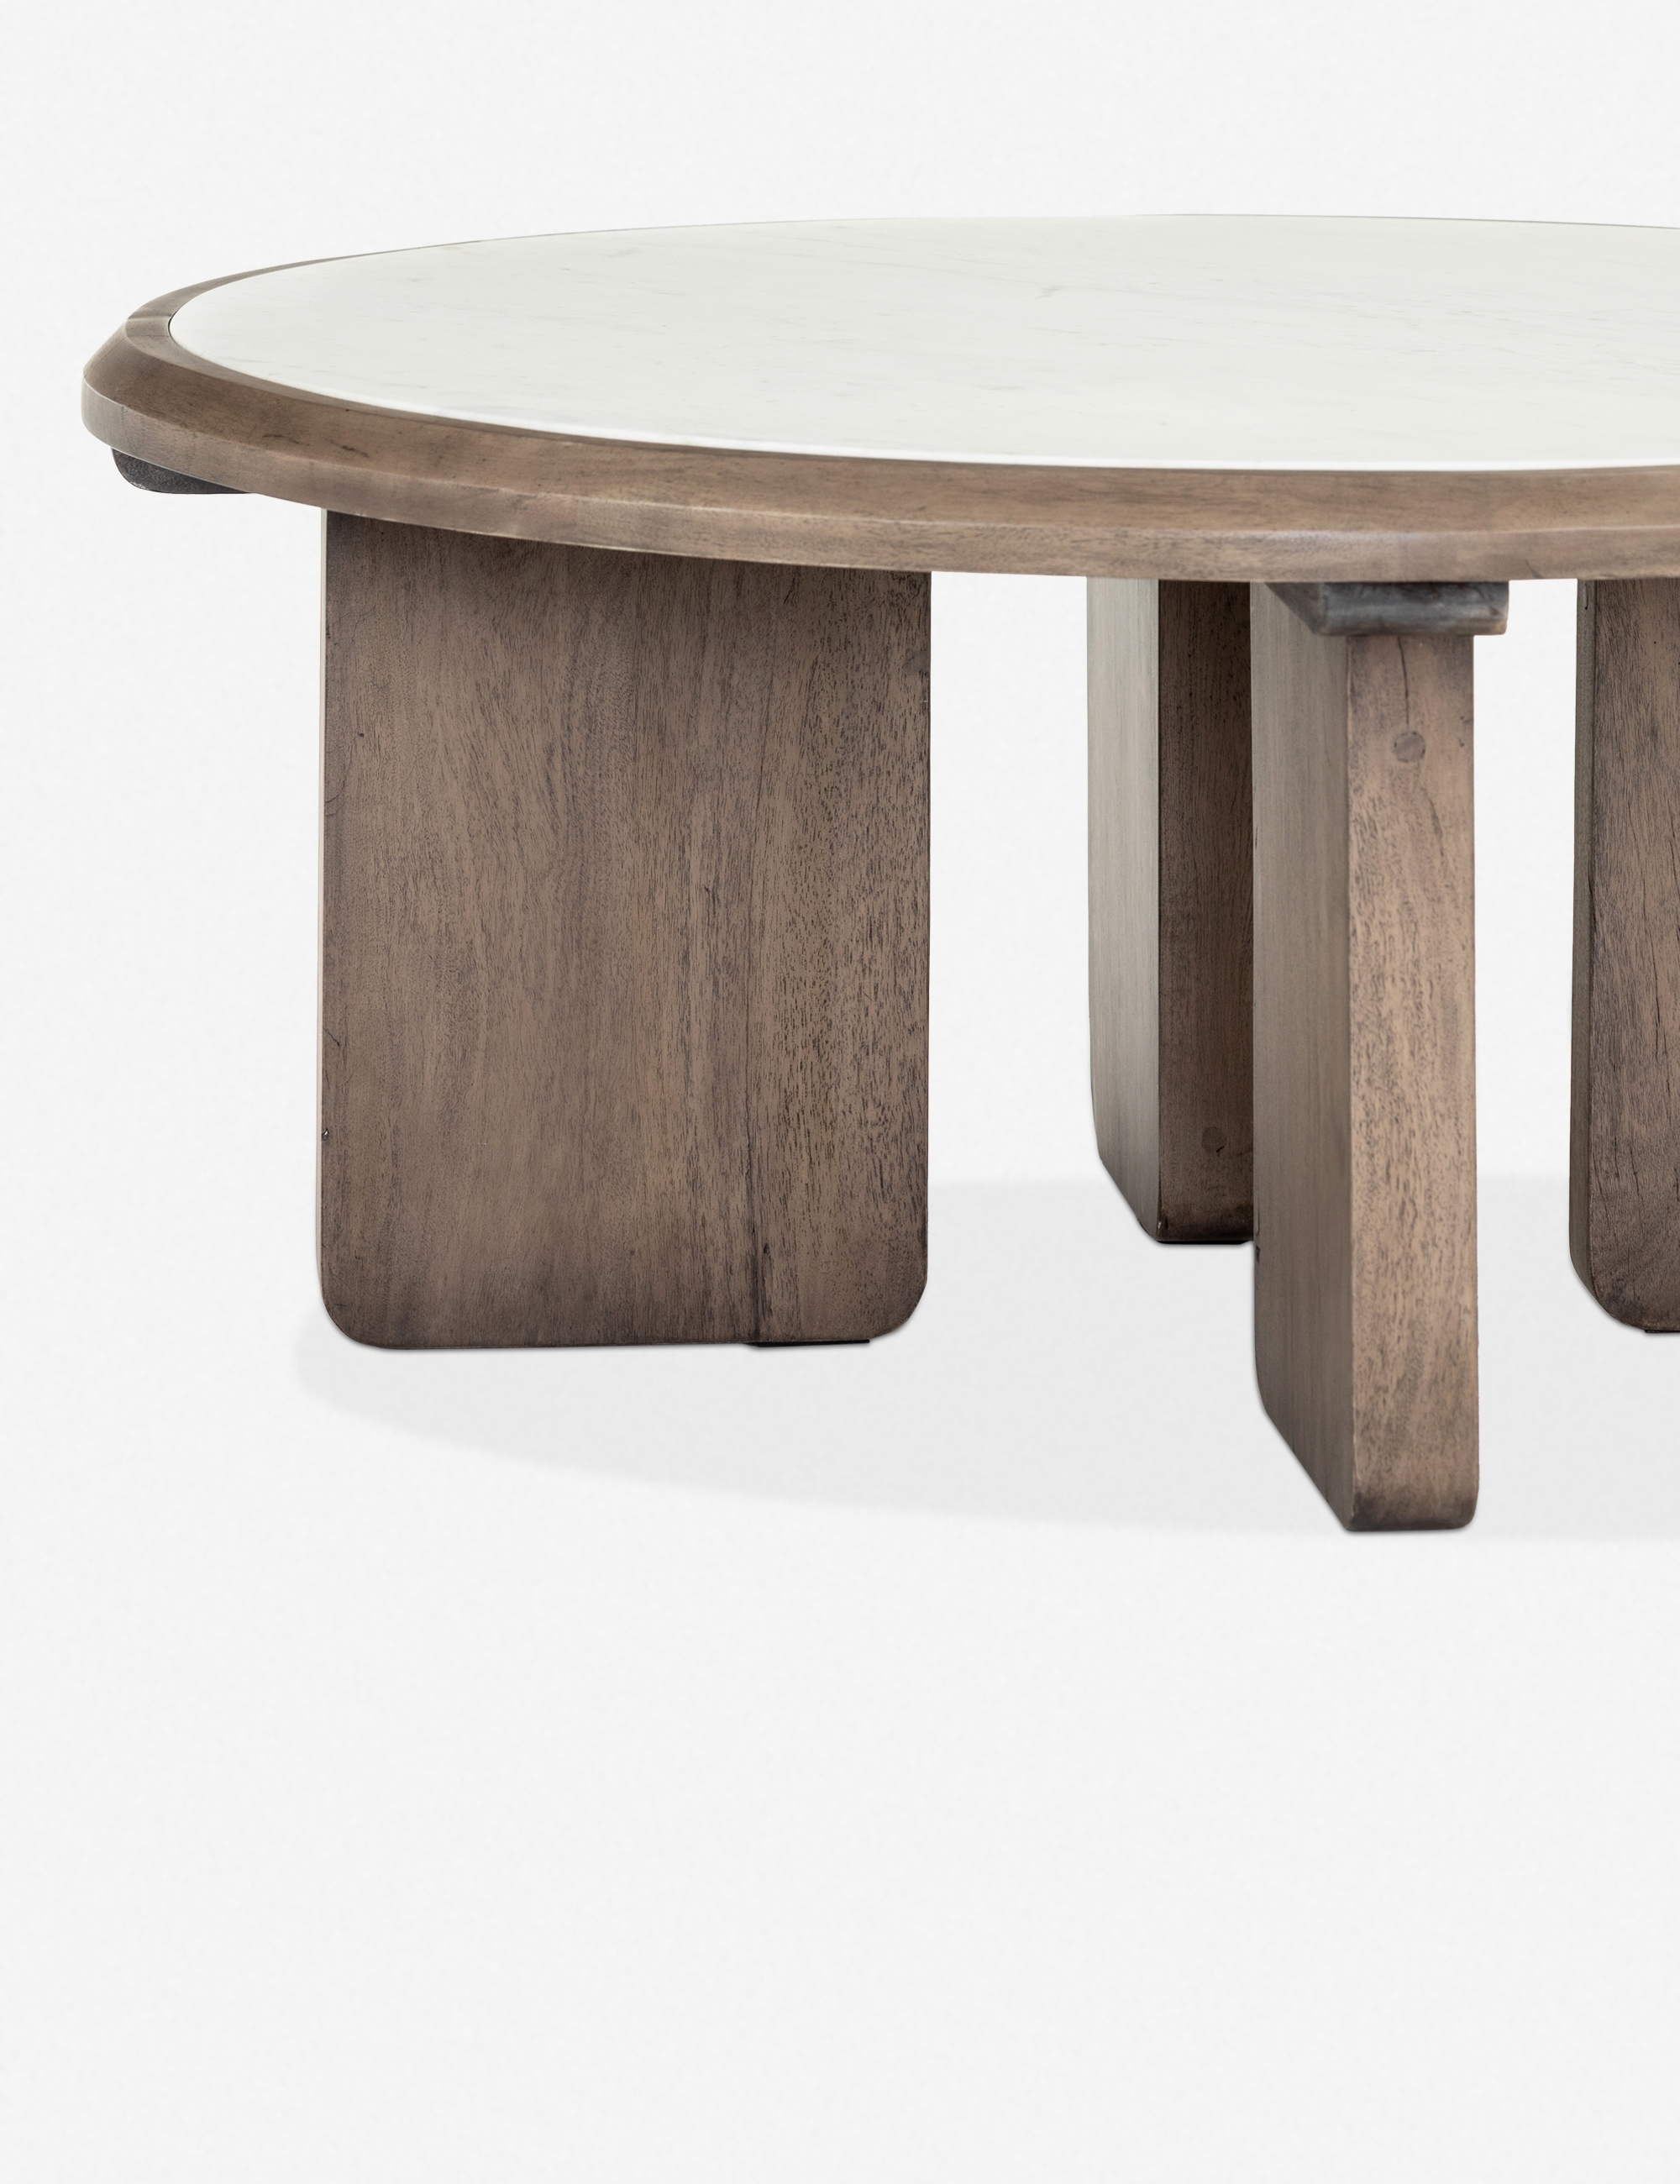 Lido Round Coffee Table - Image 5